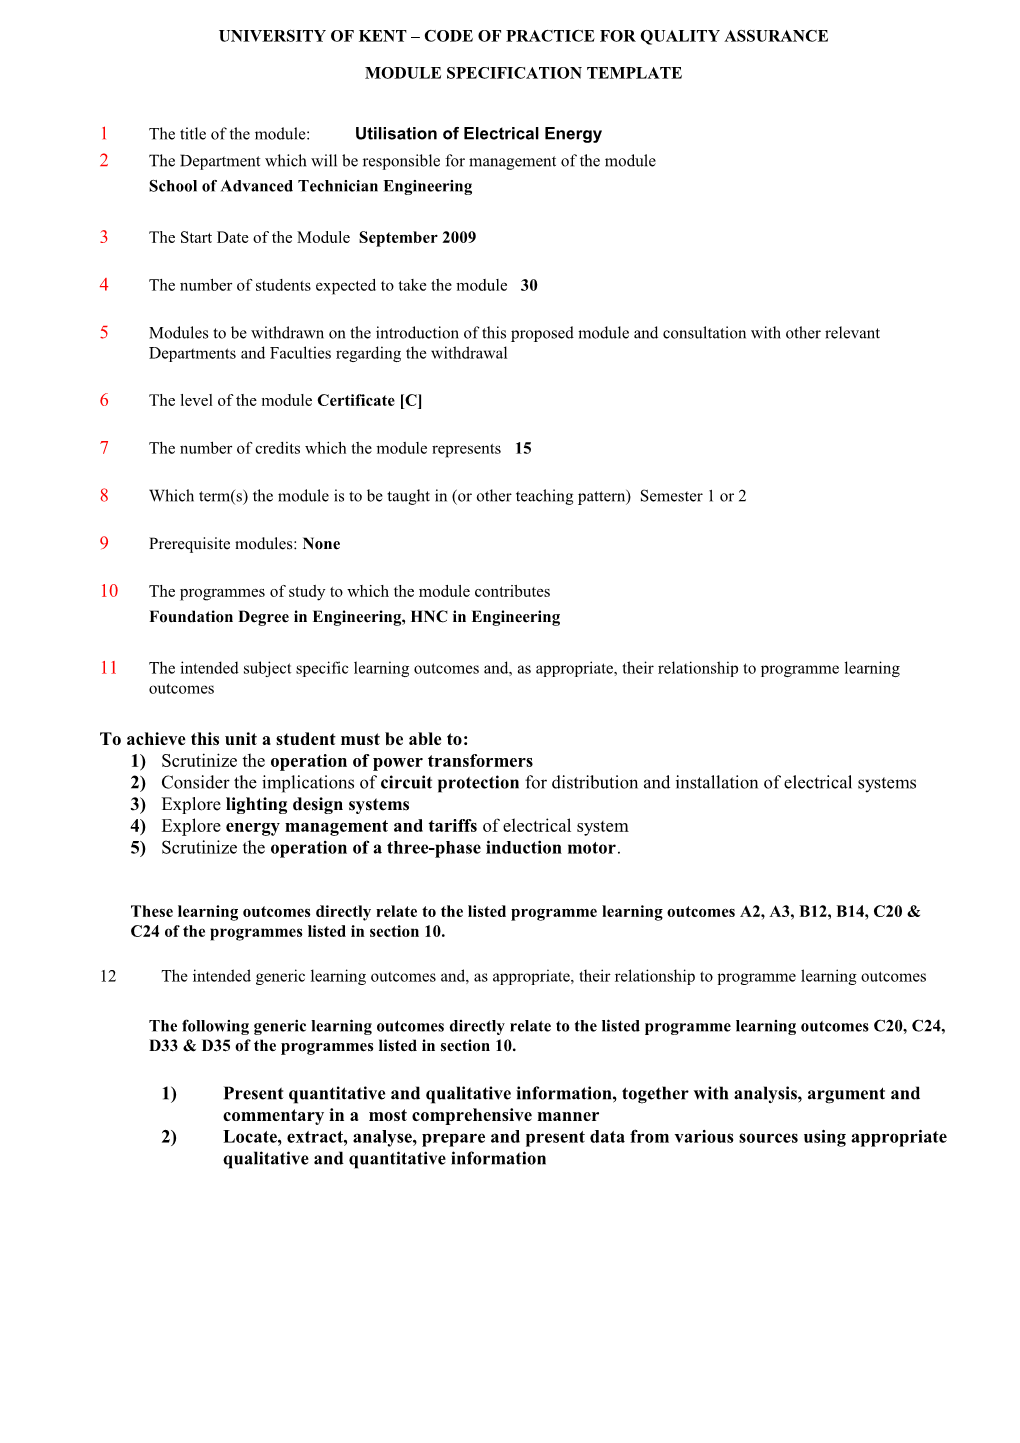 Module Specification Template s6